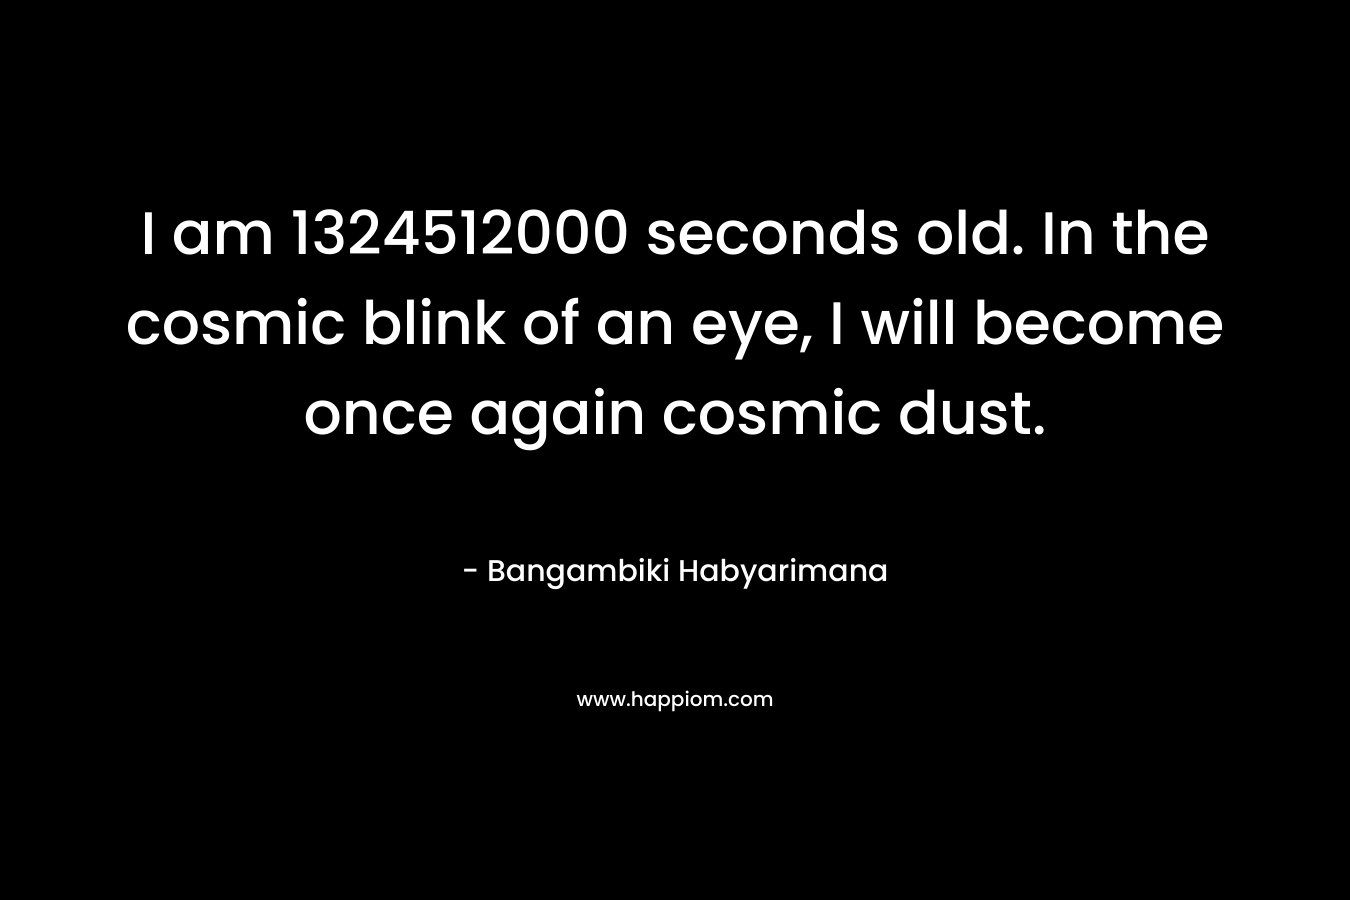 I am 1324512000 seconds old. In the cosmic blink of an eye, I will become once again cosmic dust.